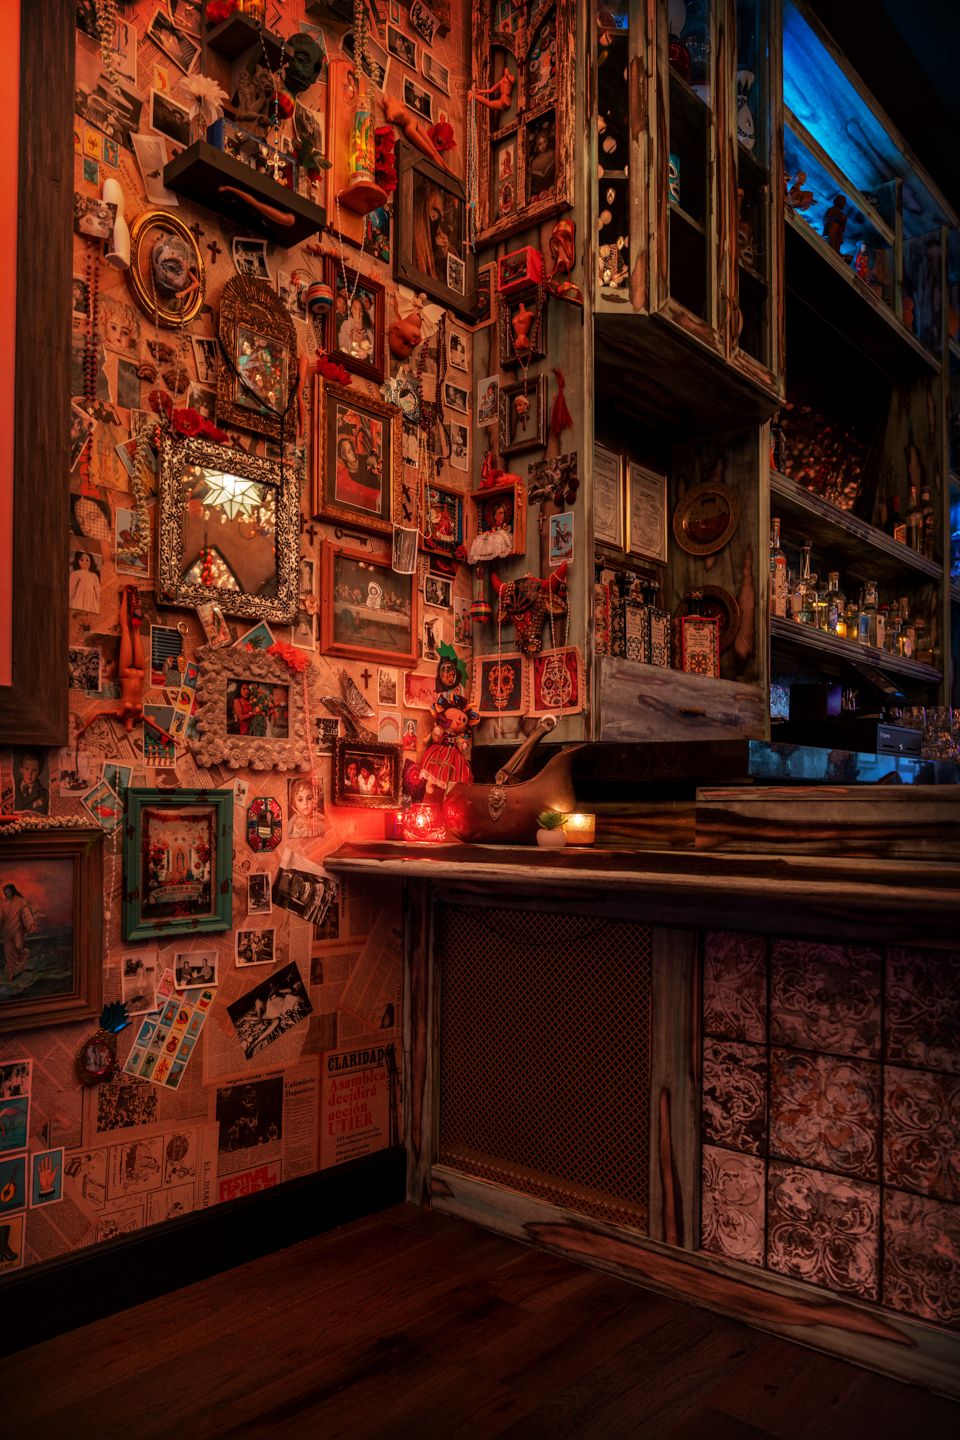 Lucky Day Bar - wall filled with framed images